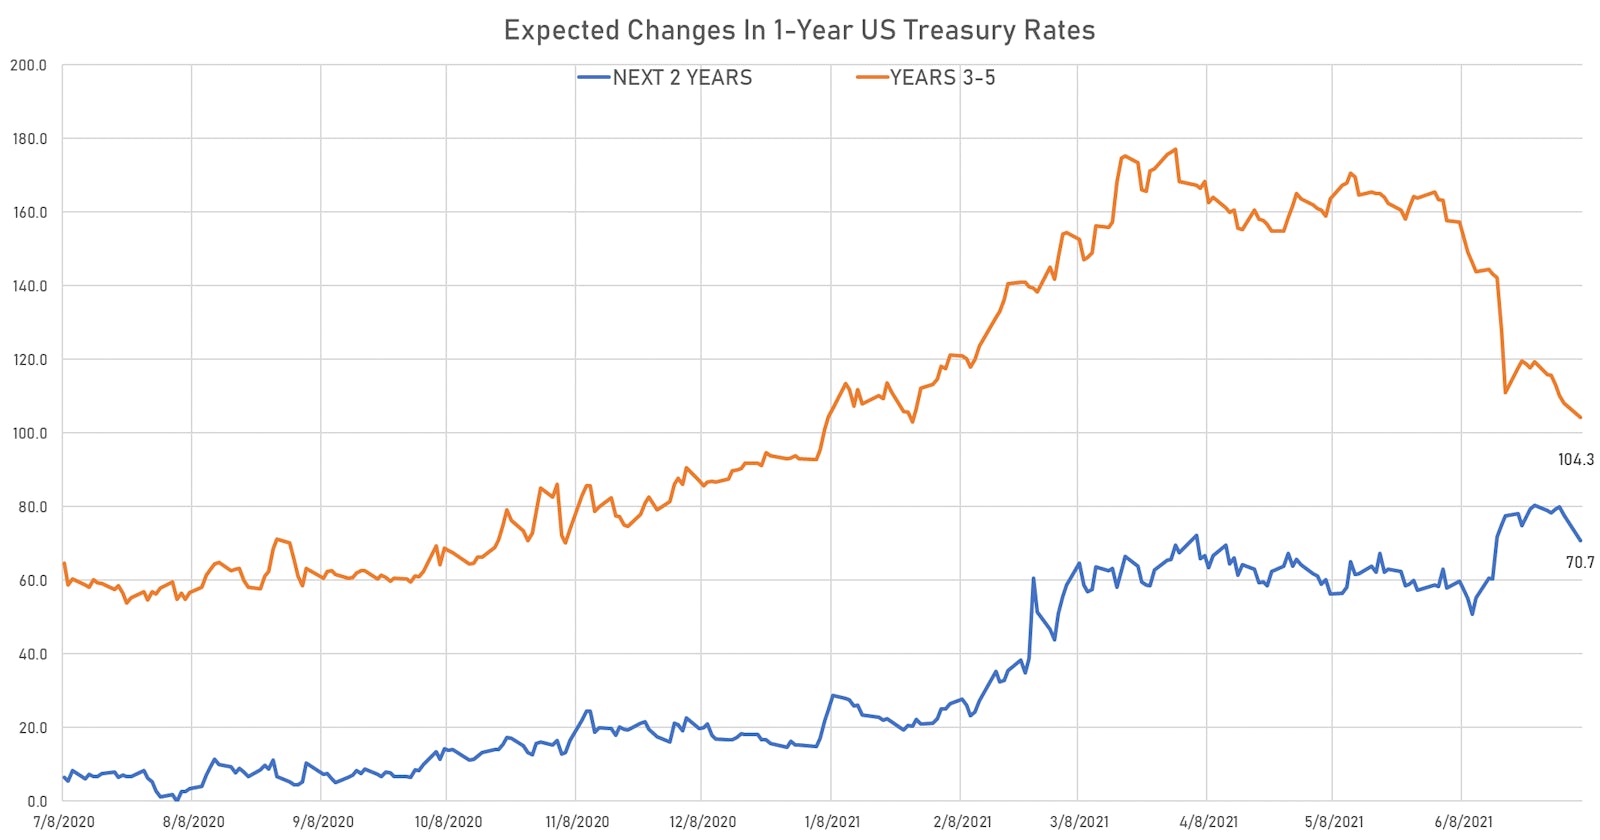 Expected Changes In 1Y Treasury Rates Over The Next 5 Years | Sources: ϕpost, Refinitiv data